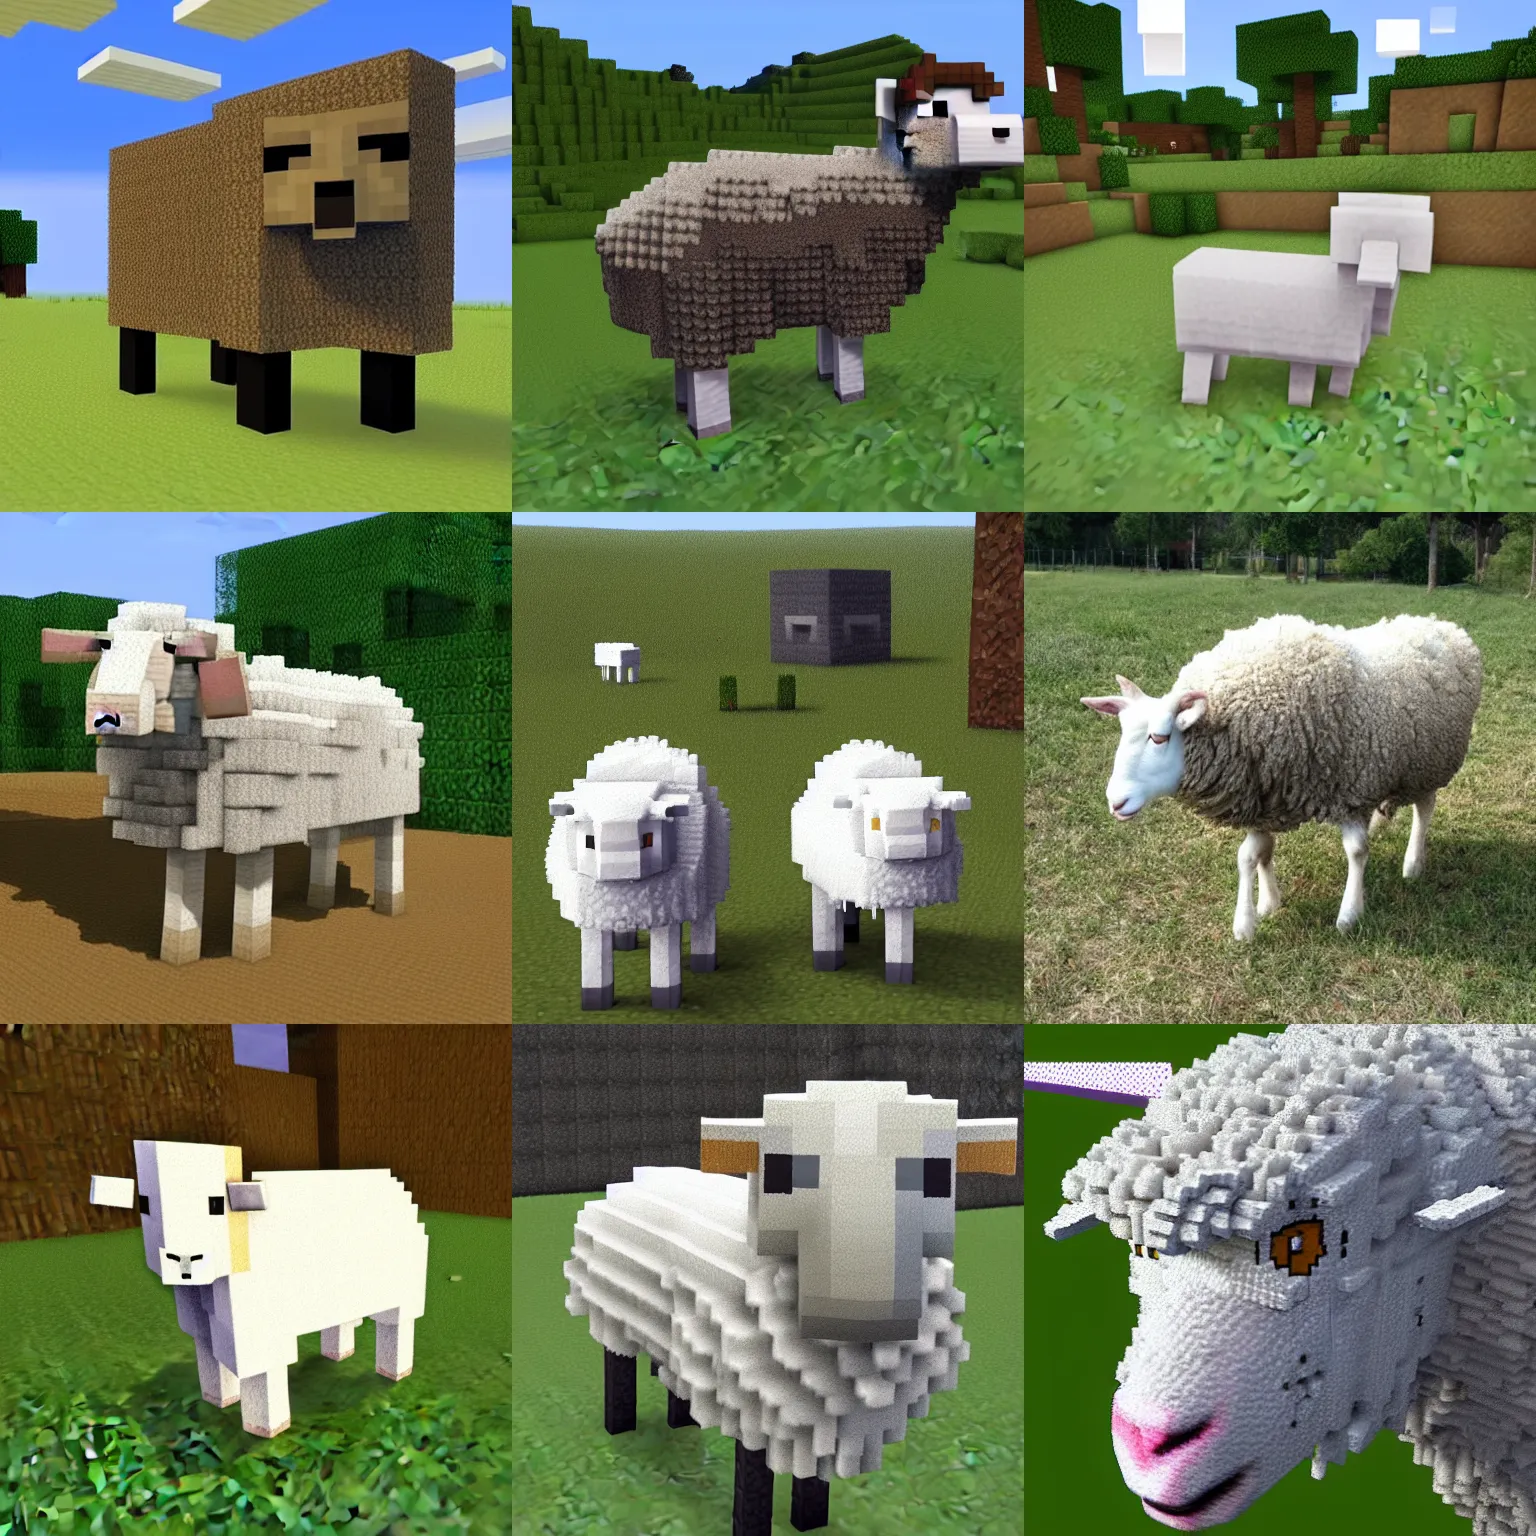 mineblox Project by Easygoing Sheep